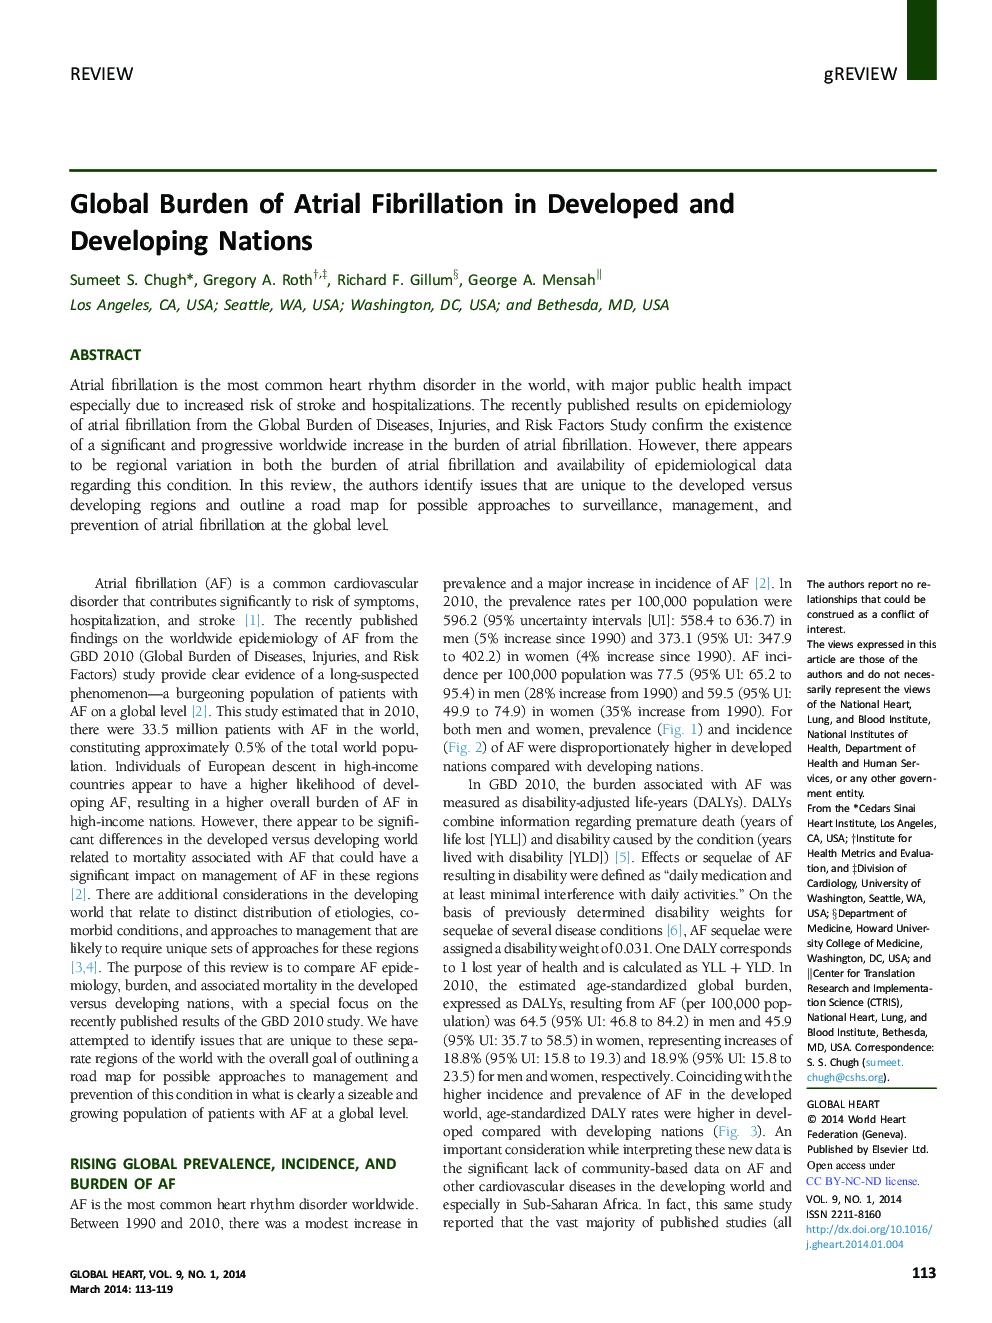 Global Burden of Atrial Fibrillation in Developed and Developing Nations